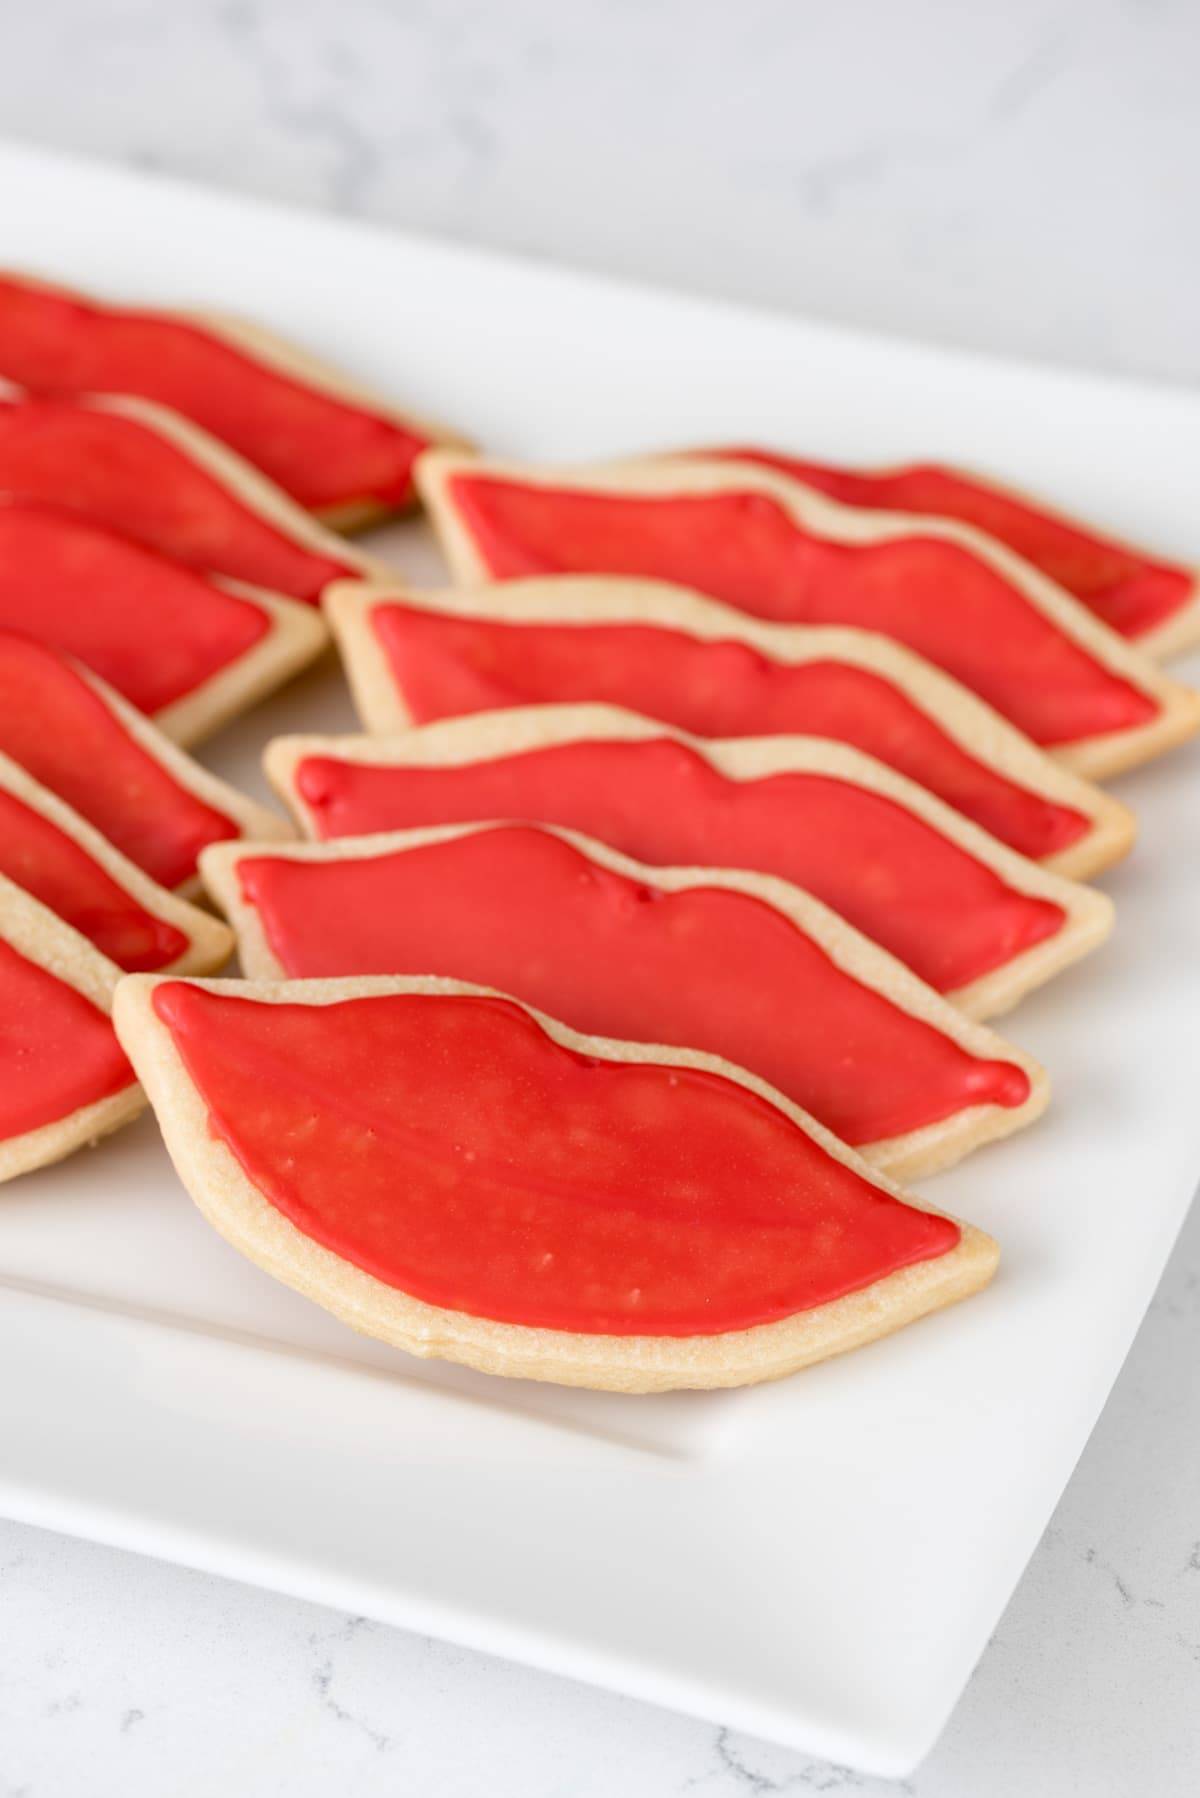 Taylor Swift Party - give Red Lip sugar cookies as a gift! These cookies are so easy to make and so fun!